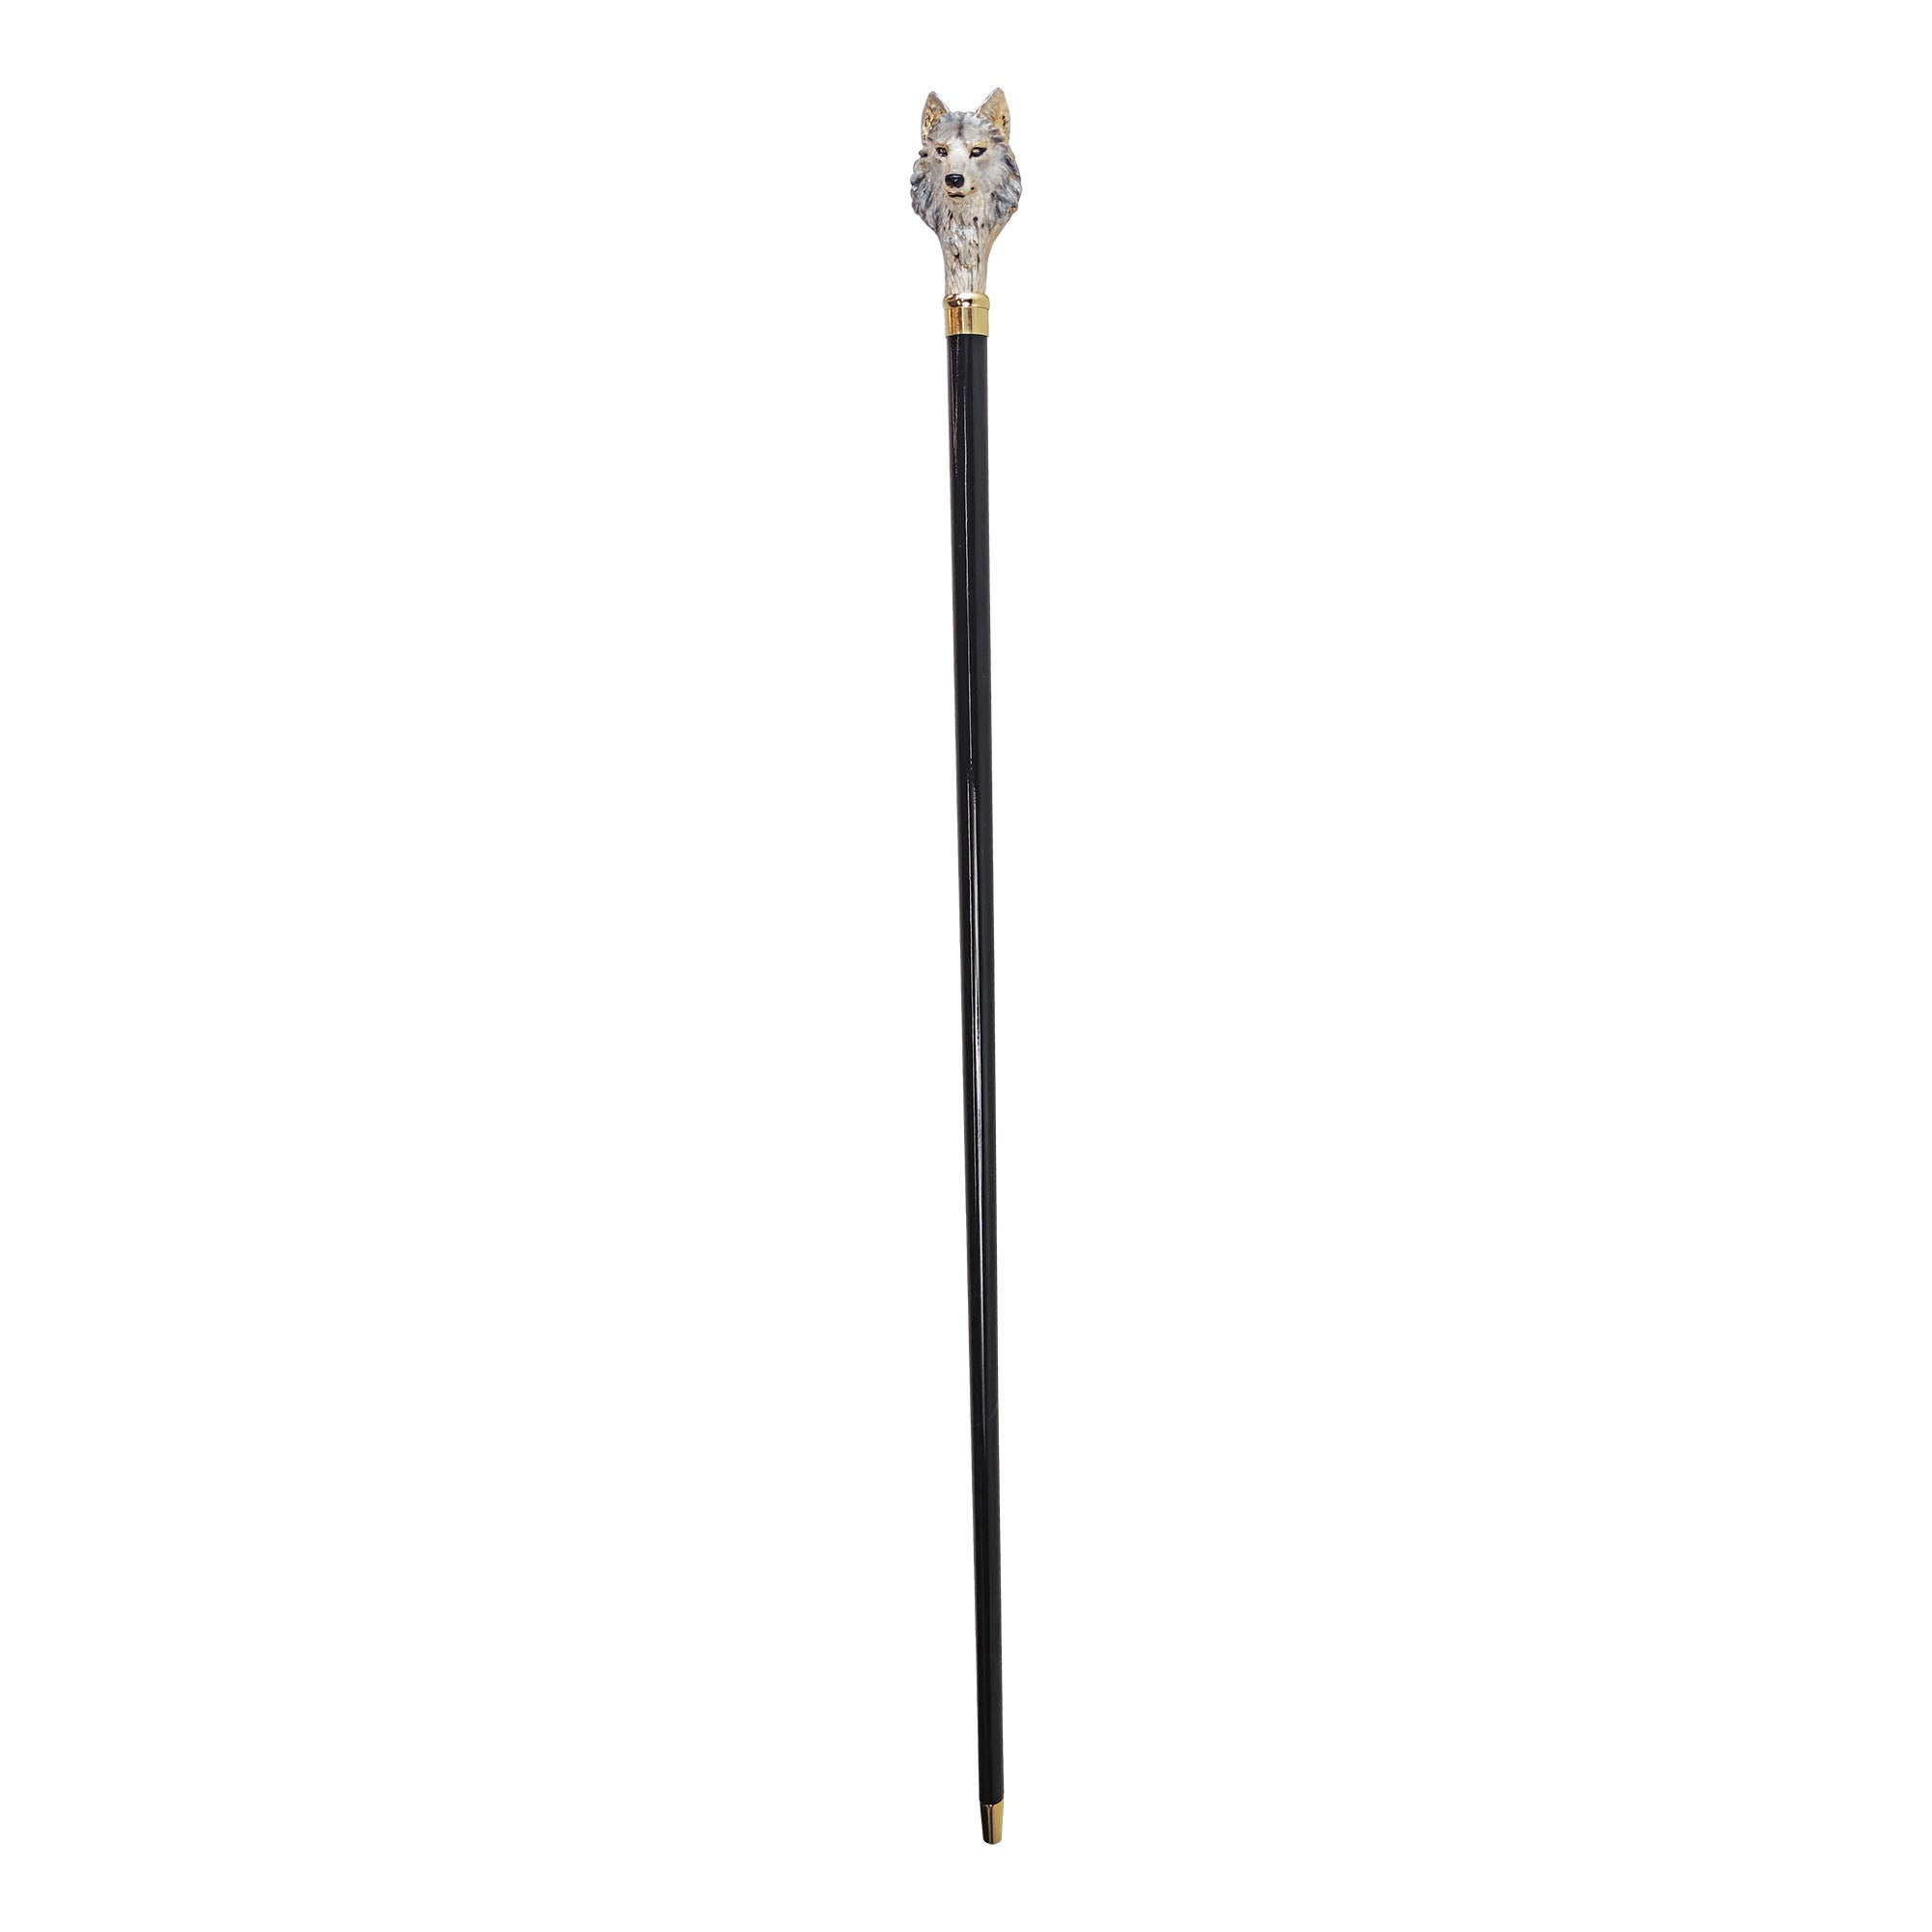 Hand-engraved metal Walking stick - 24K goldplated – ilMarchesato - Luxury  Umbrellas, Canes and Shoehorns